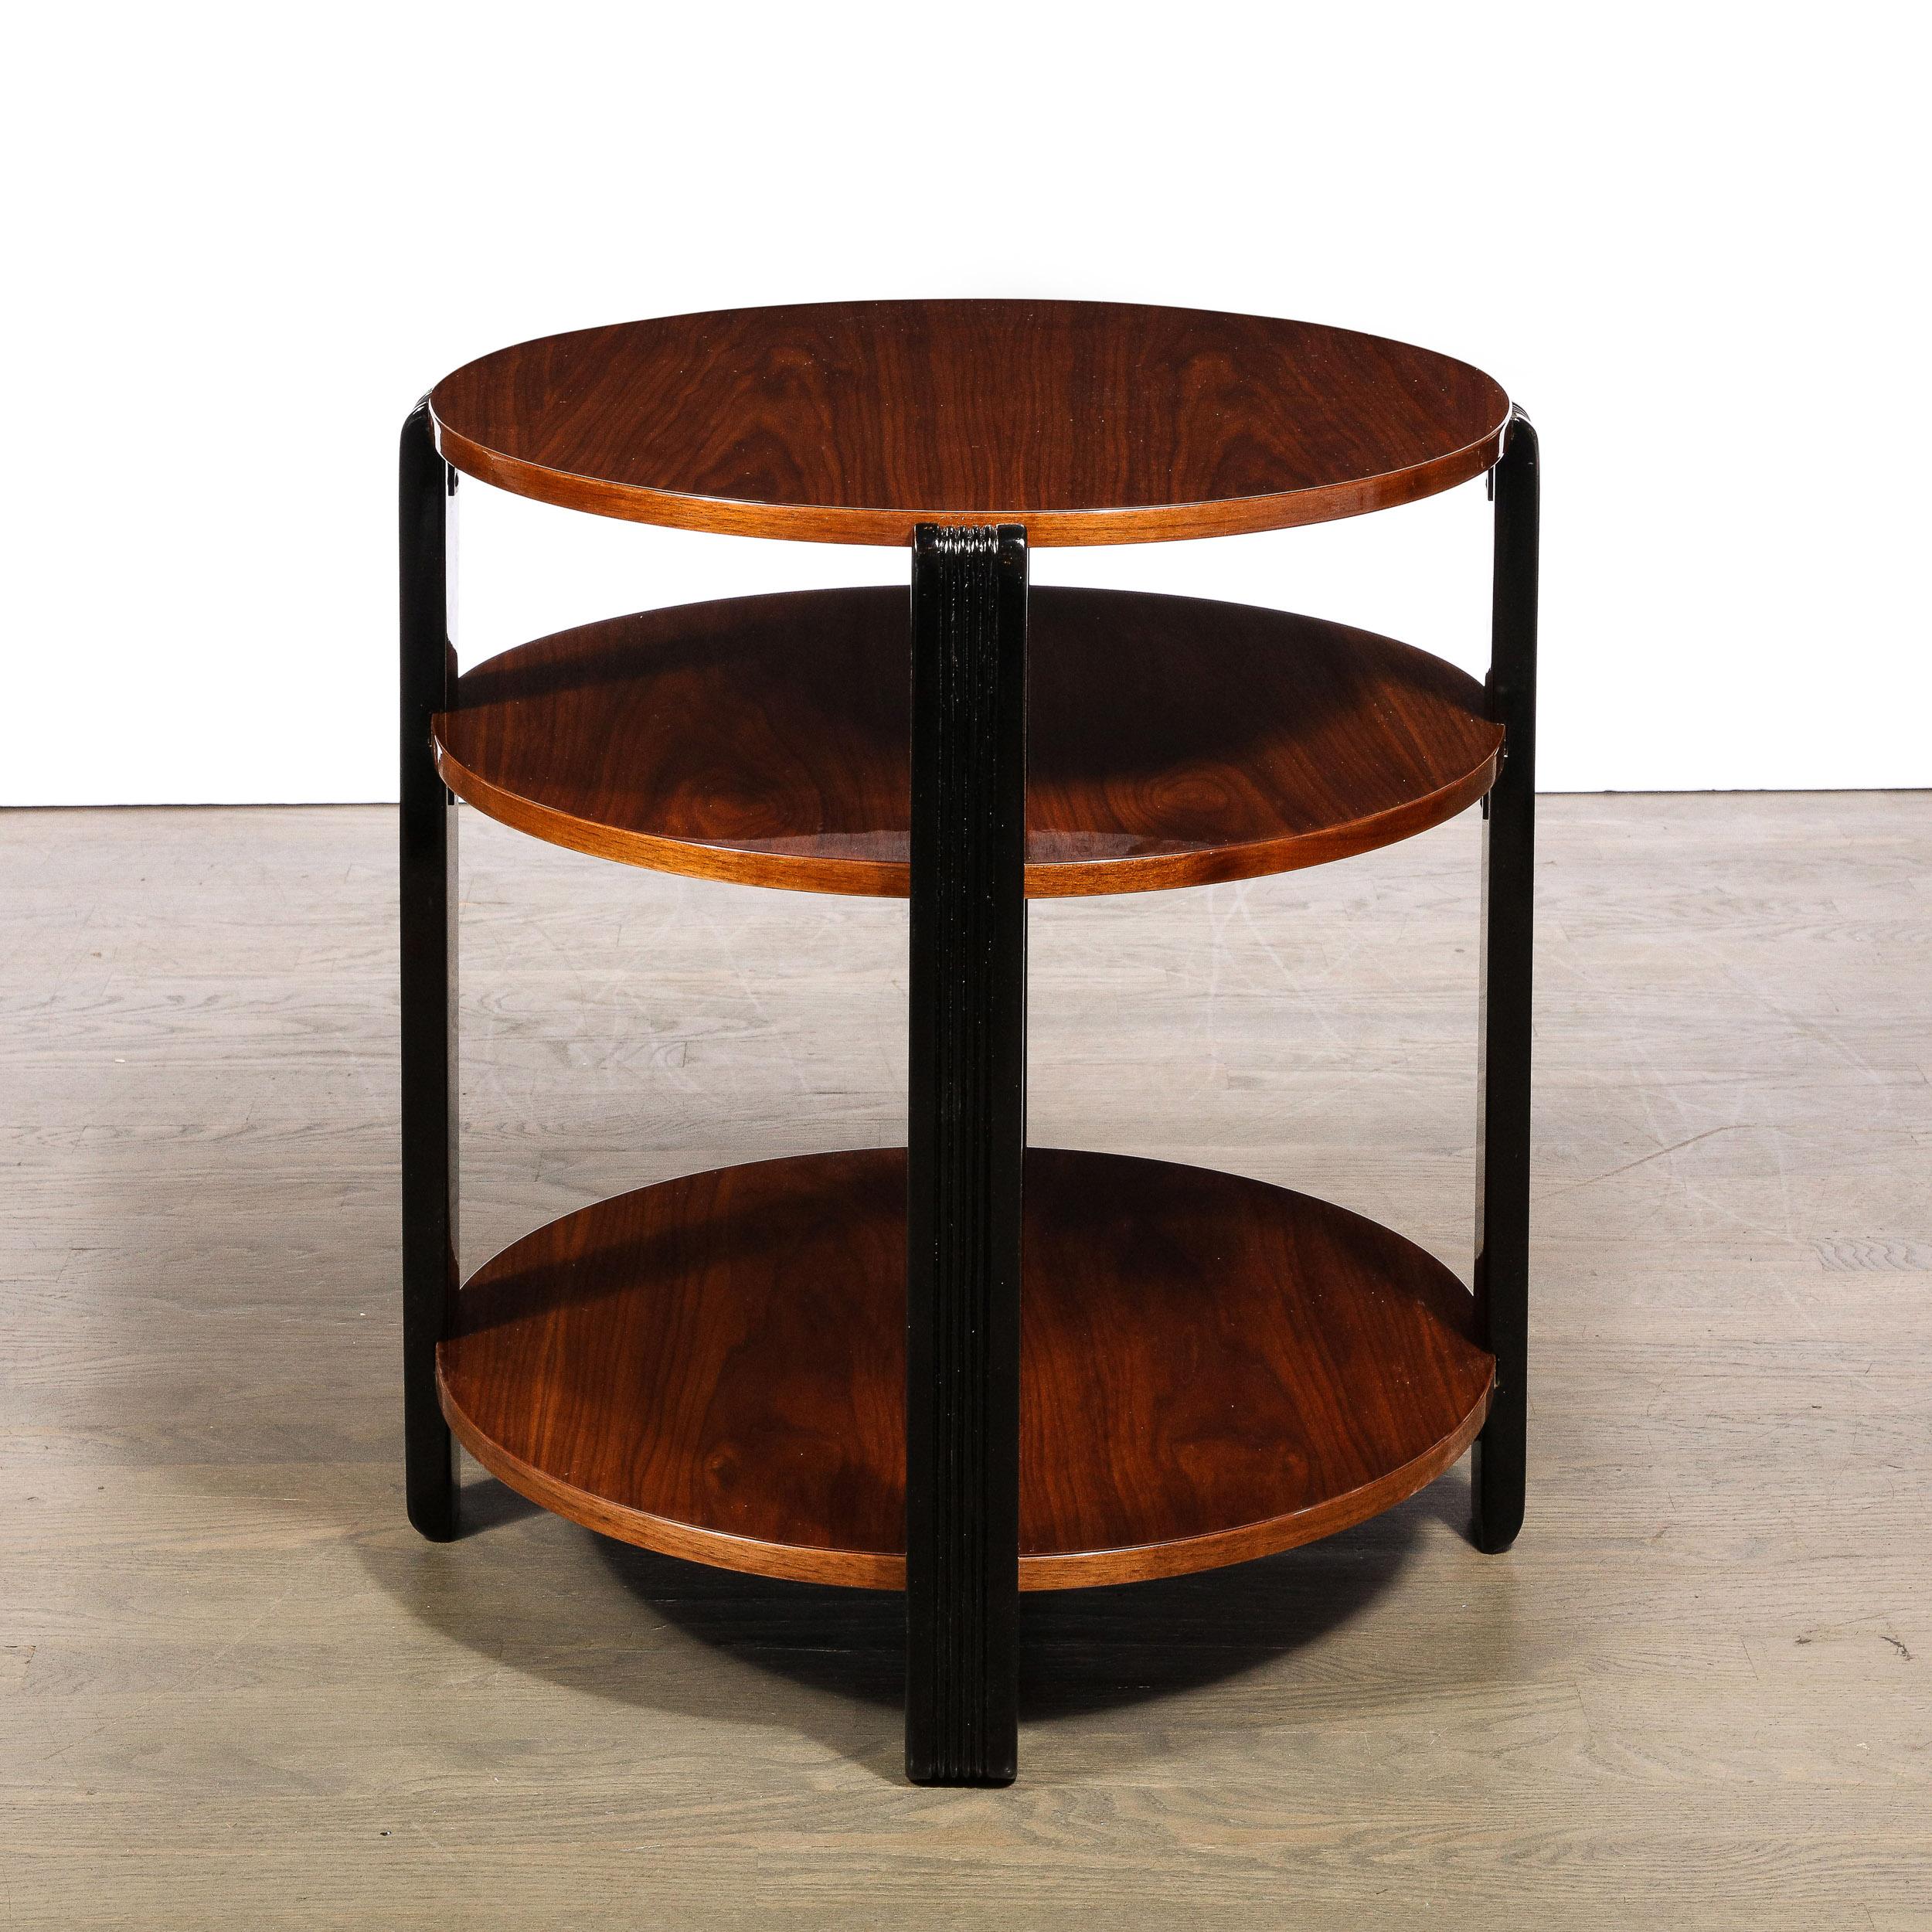 This elegant Art Deco machine age occasional table was realized in the United States circa 1935. It features three asymmetrically spaced tiers of beautiful bookmatched walnut connected by four lustrous black lacquer supports with vertical striated